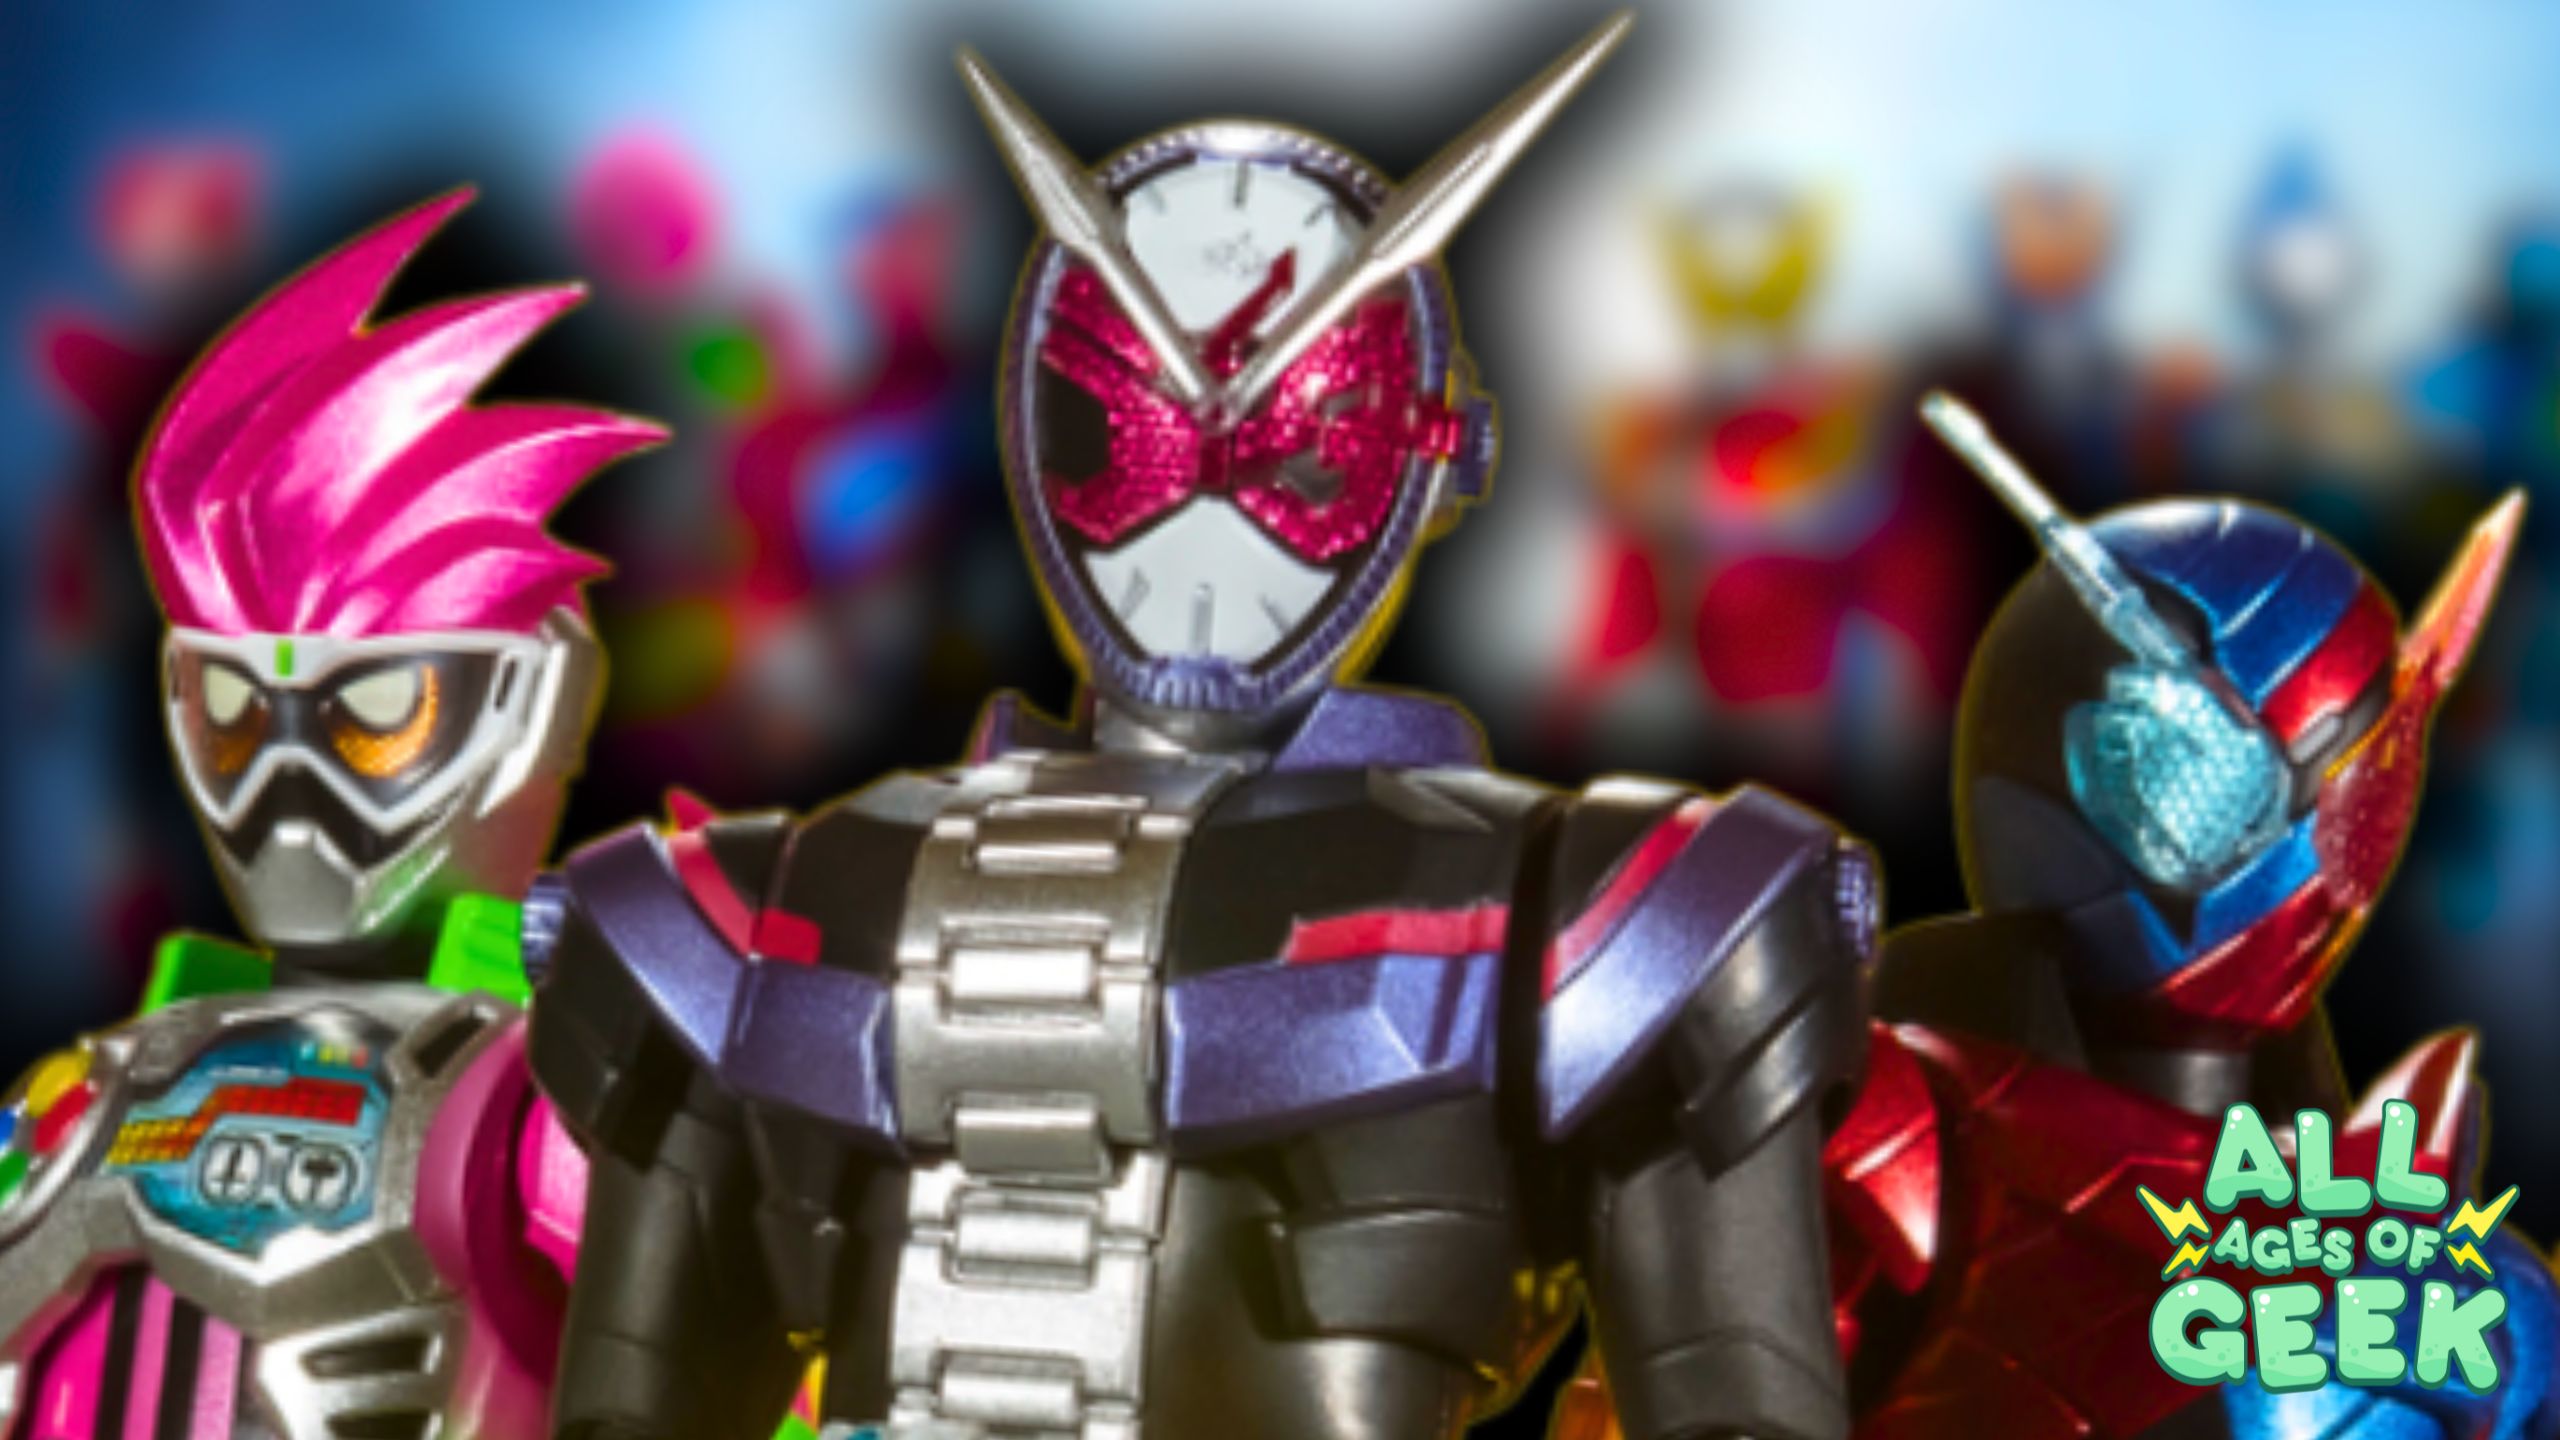 Three Kamen Rider characters are prominently featured in the foreground with vibrant colors. The character on the left has bright pink hair and a futuristic mask, the center character has a clock-themed helmet with red eyes, and the character on the right sports a blue and red helmet with a unique design. In the background, blurred figures of more Kamen Riders can be seen. The 'All Ages of Geek' logo is positioned at the bottom right corner.